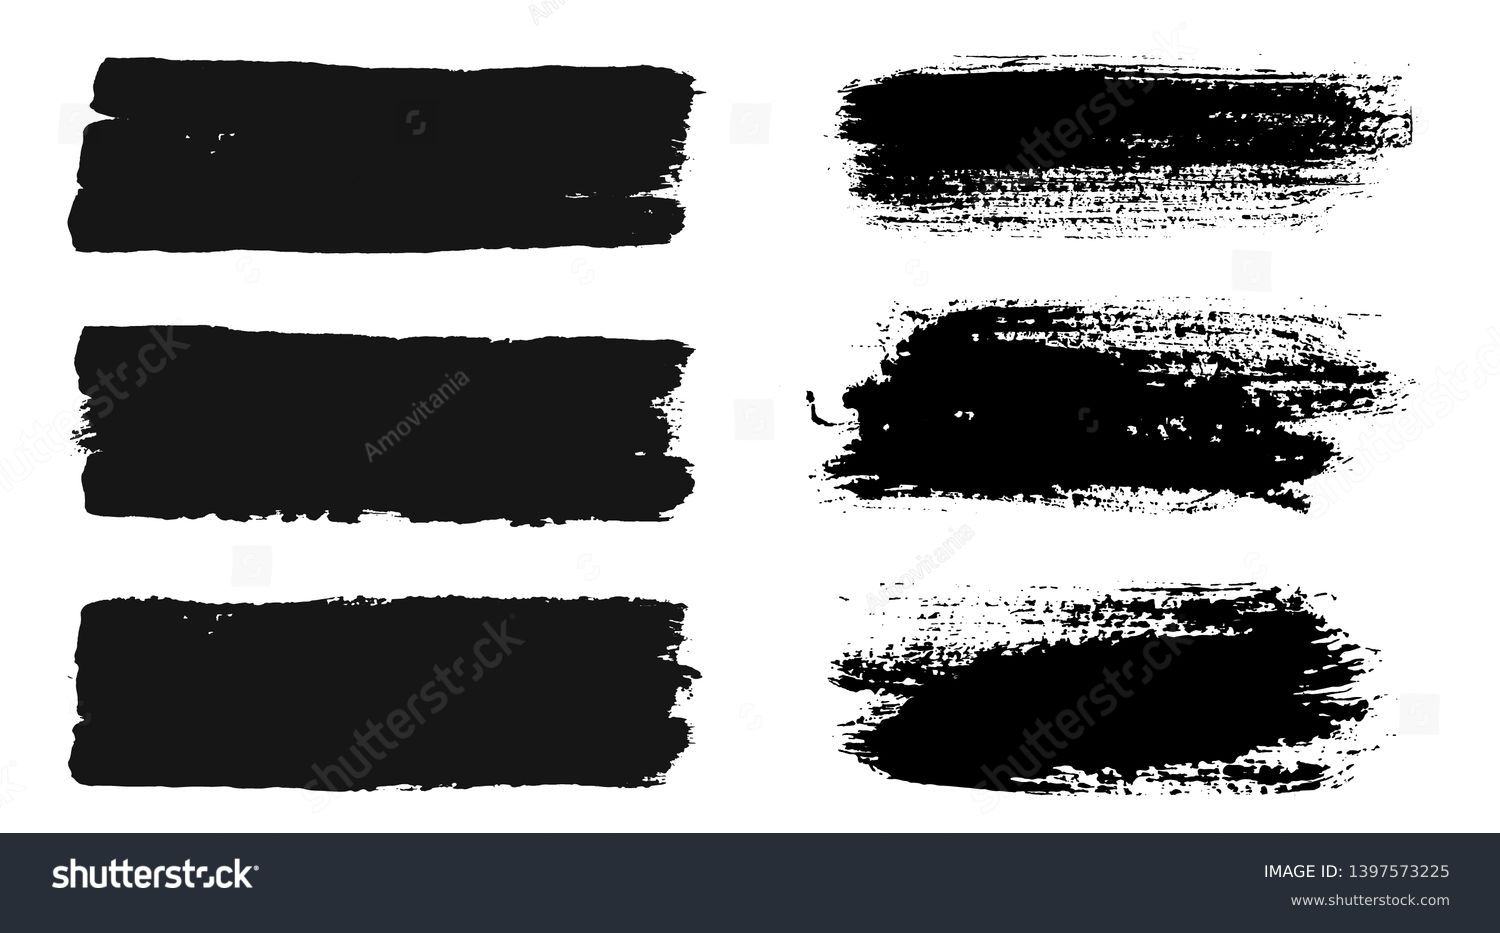 Brush strokes. Vector paintbrush set. Grunge design elements. Rectangle text boxes. Dirty distress texture banners. Ink splatters. Grungy painted objects. #1397573225